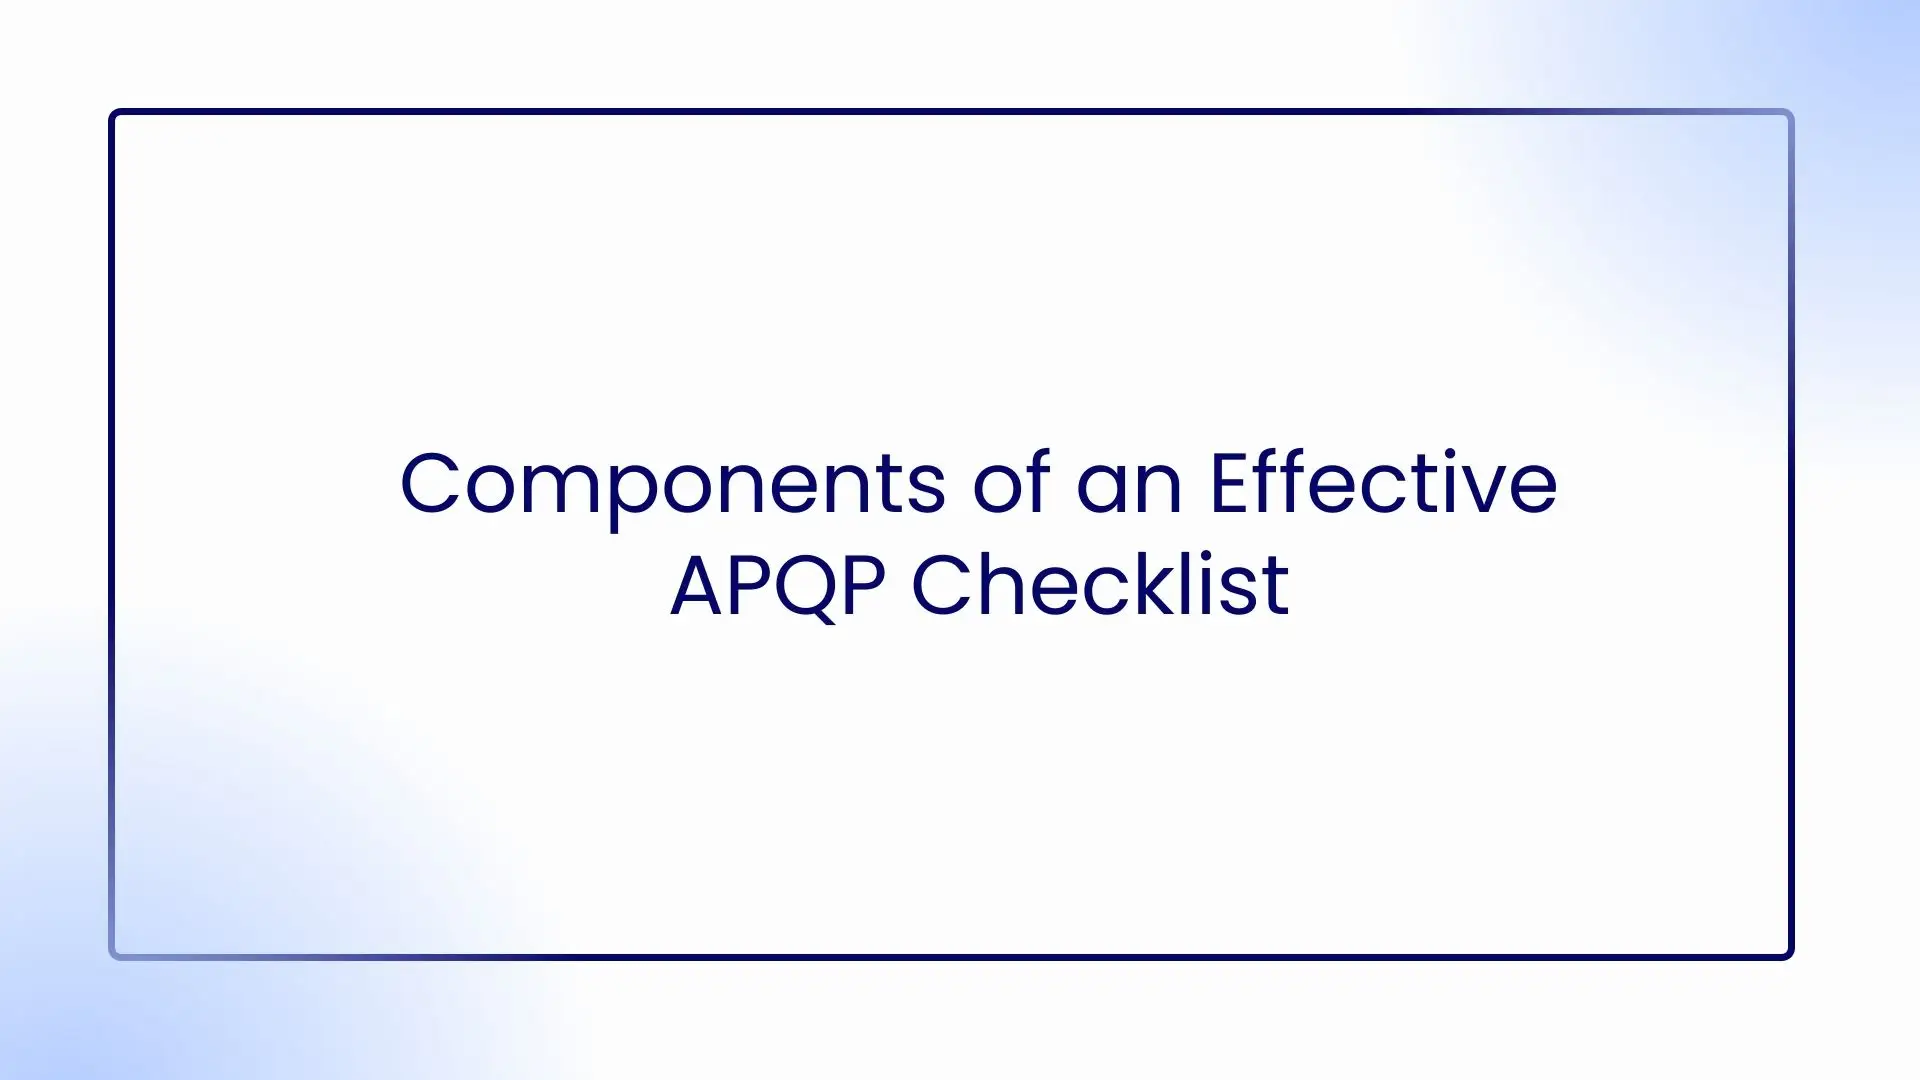 A diagram of the components of an effective APQP checklist